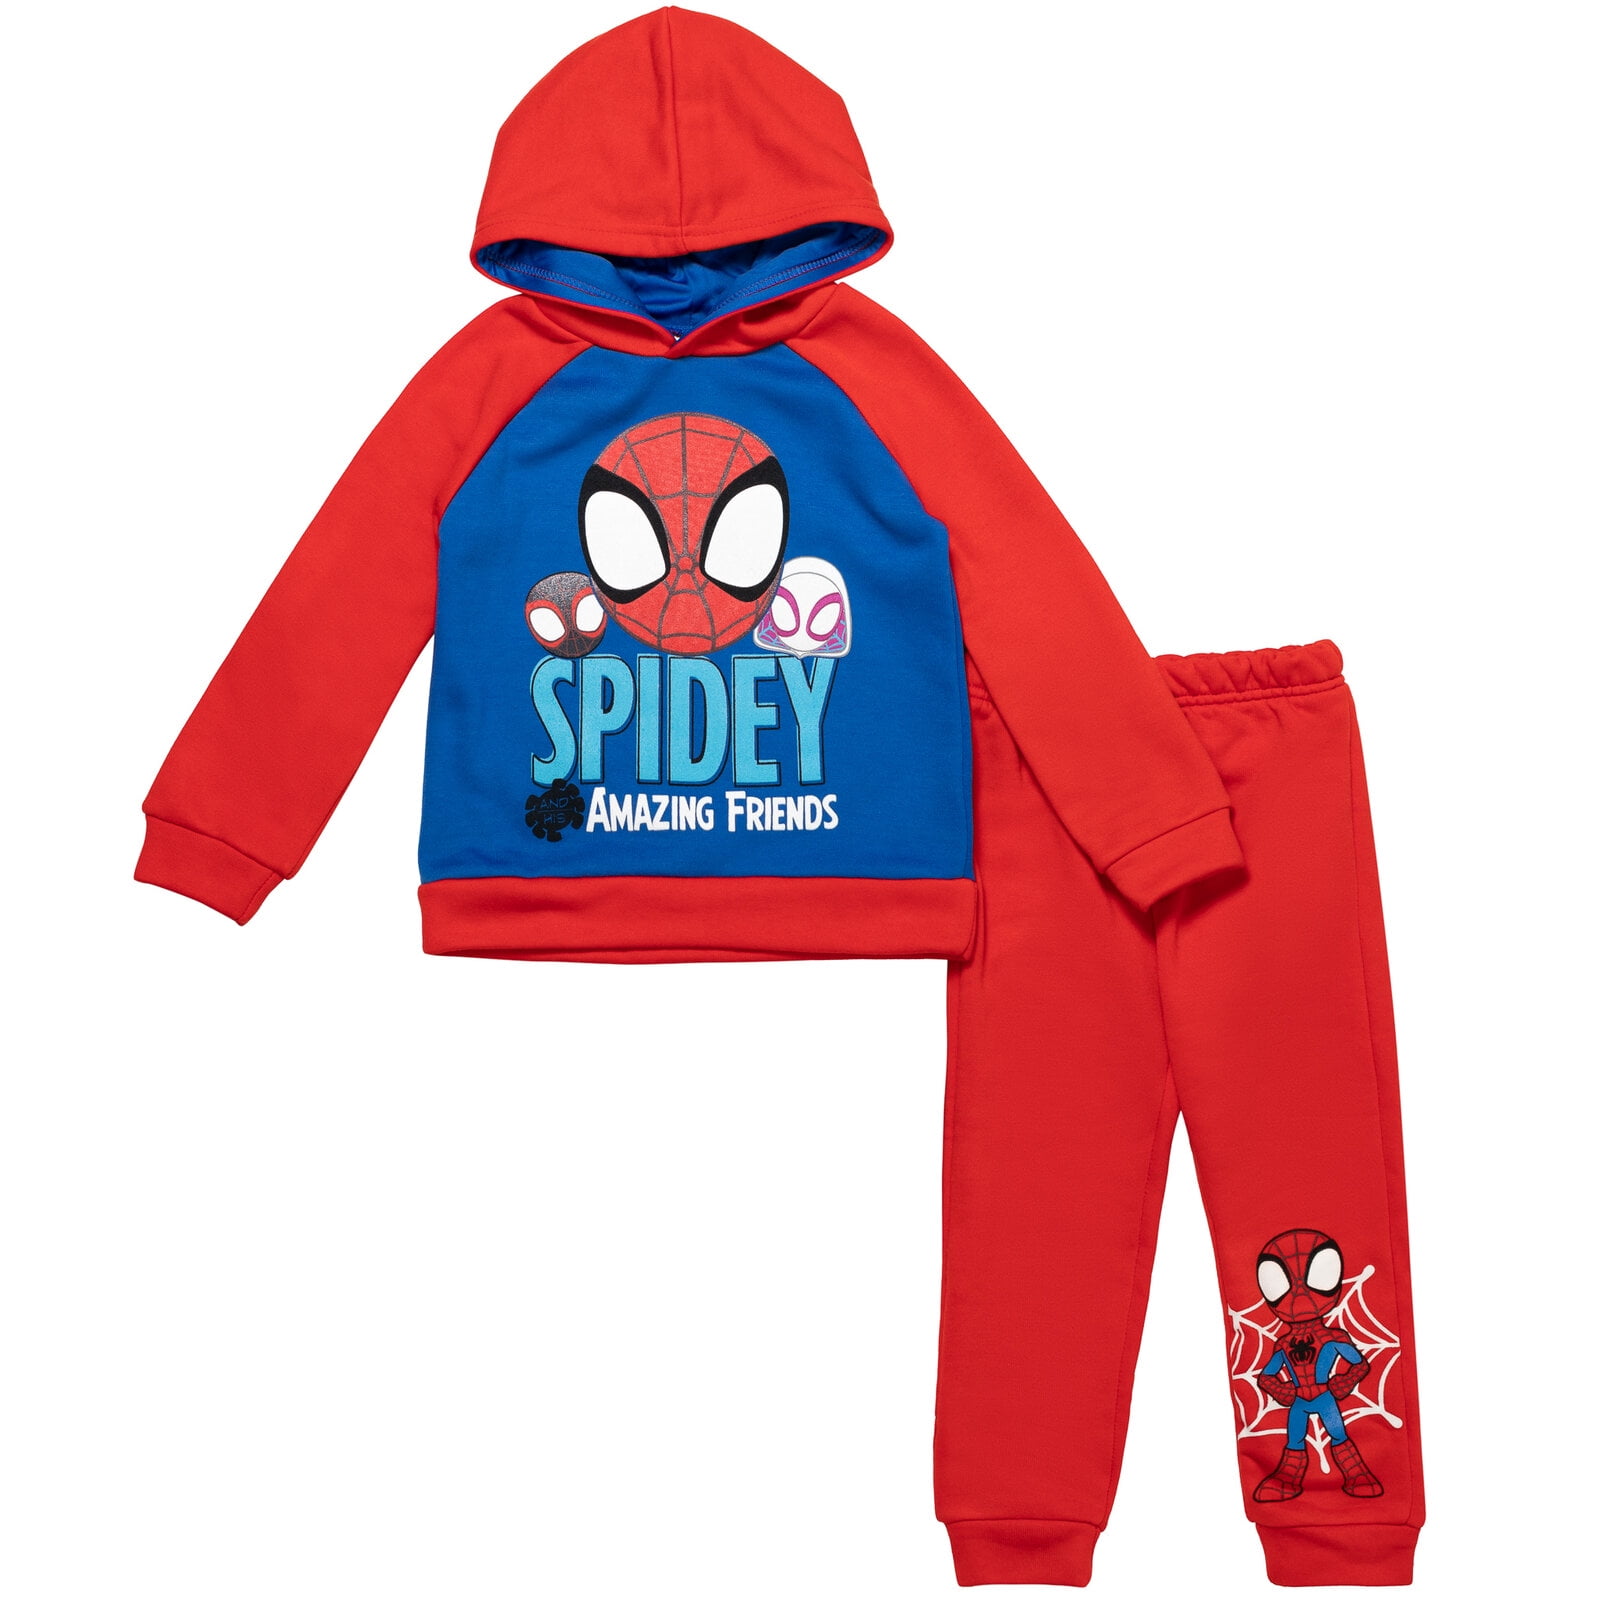 Marvel 2-Pack Spiderman Hoodie Sweatshirts for Boys and Toddlers Apparel 